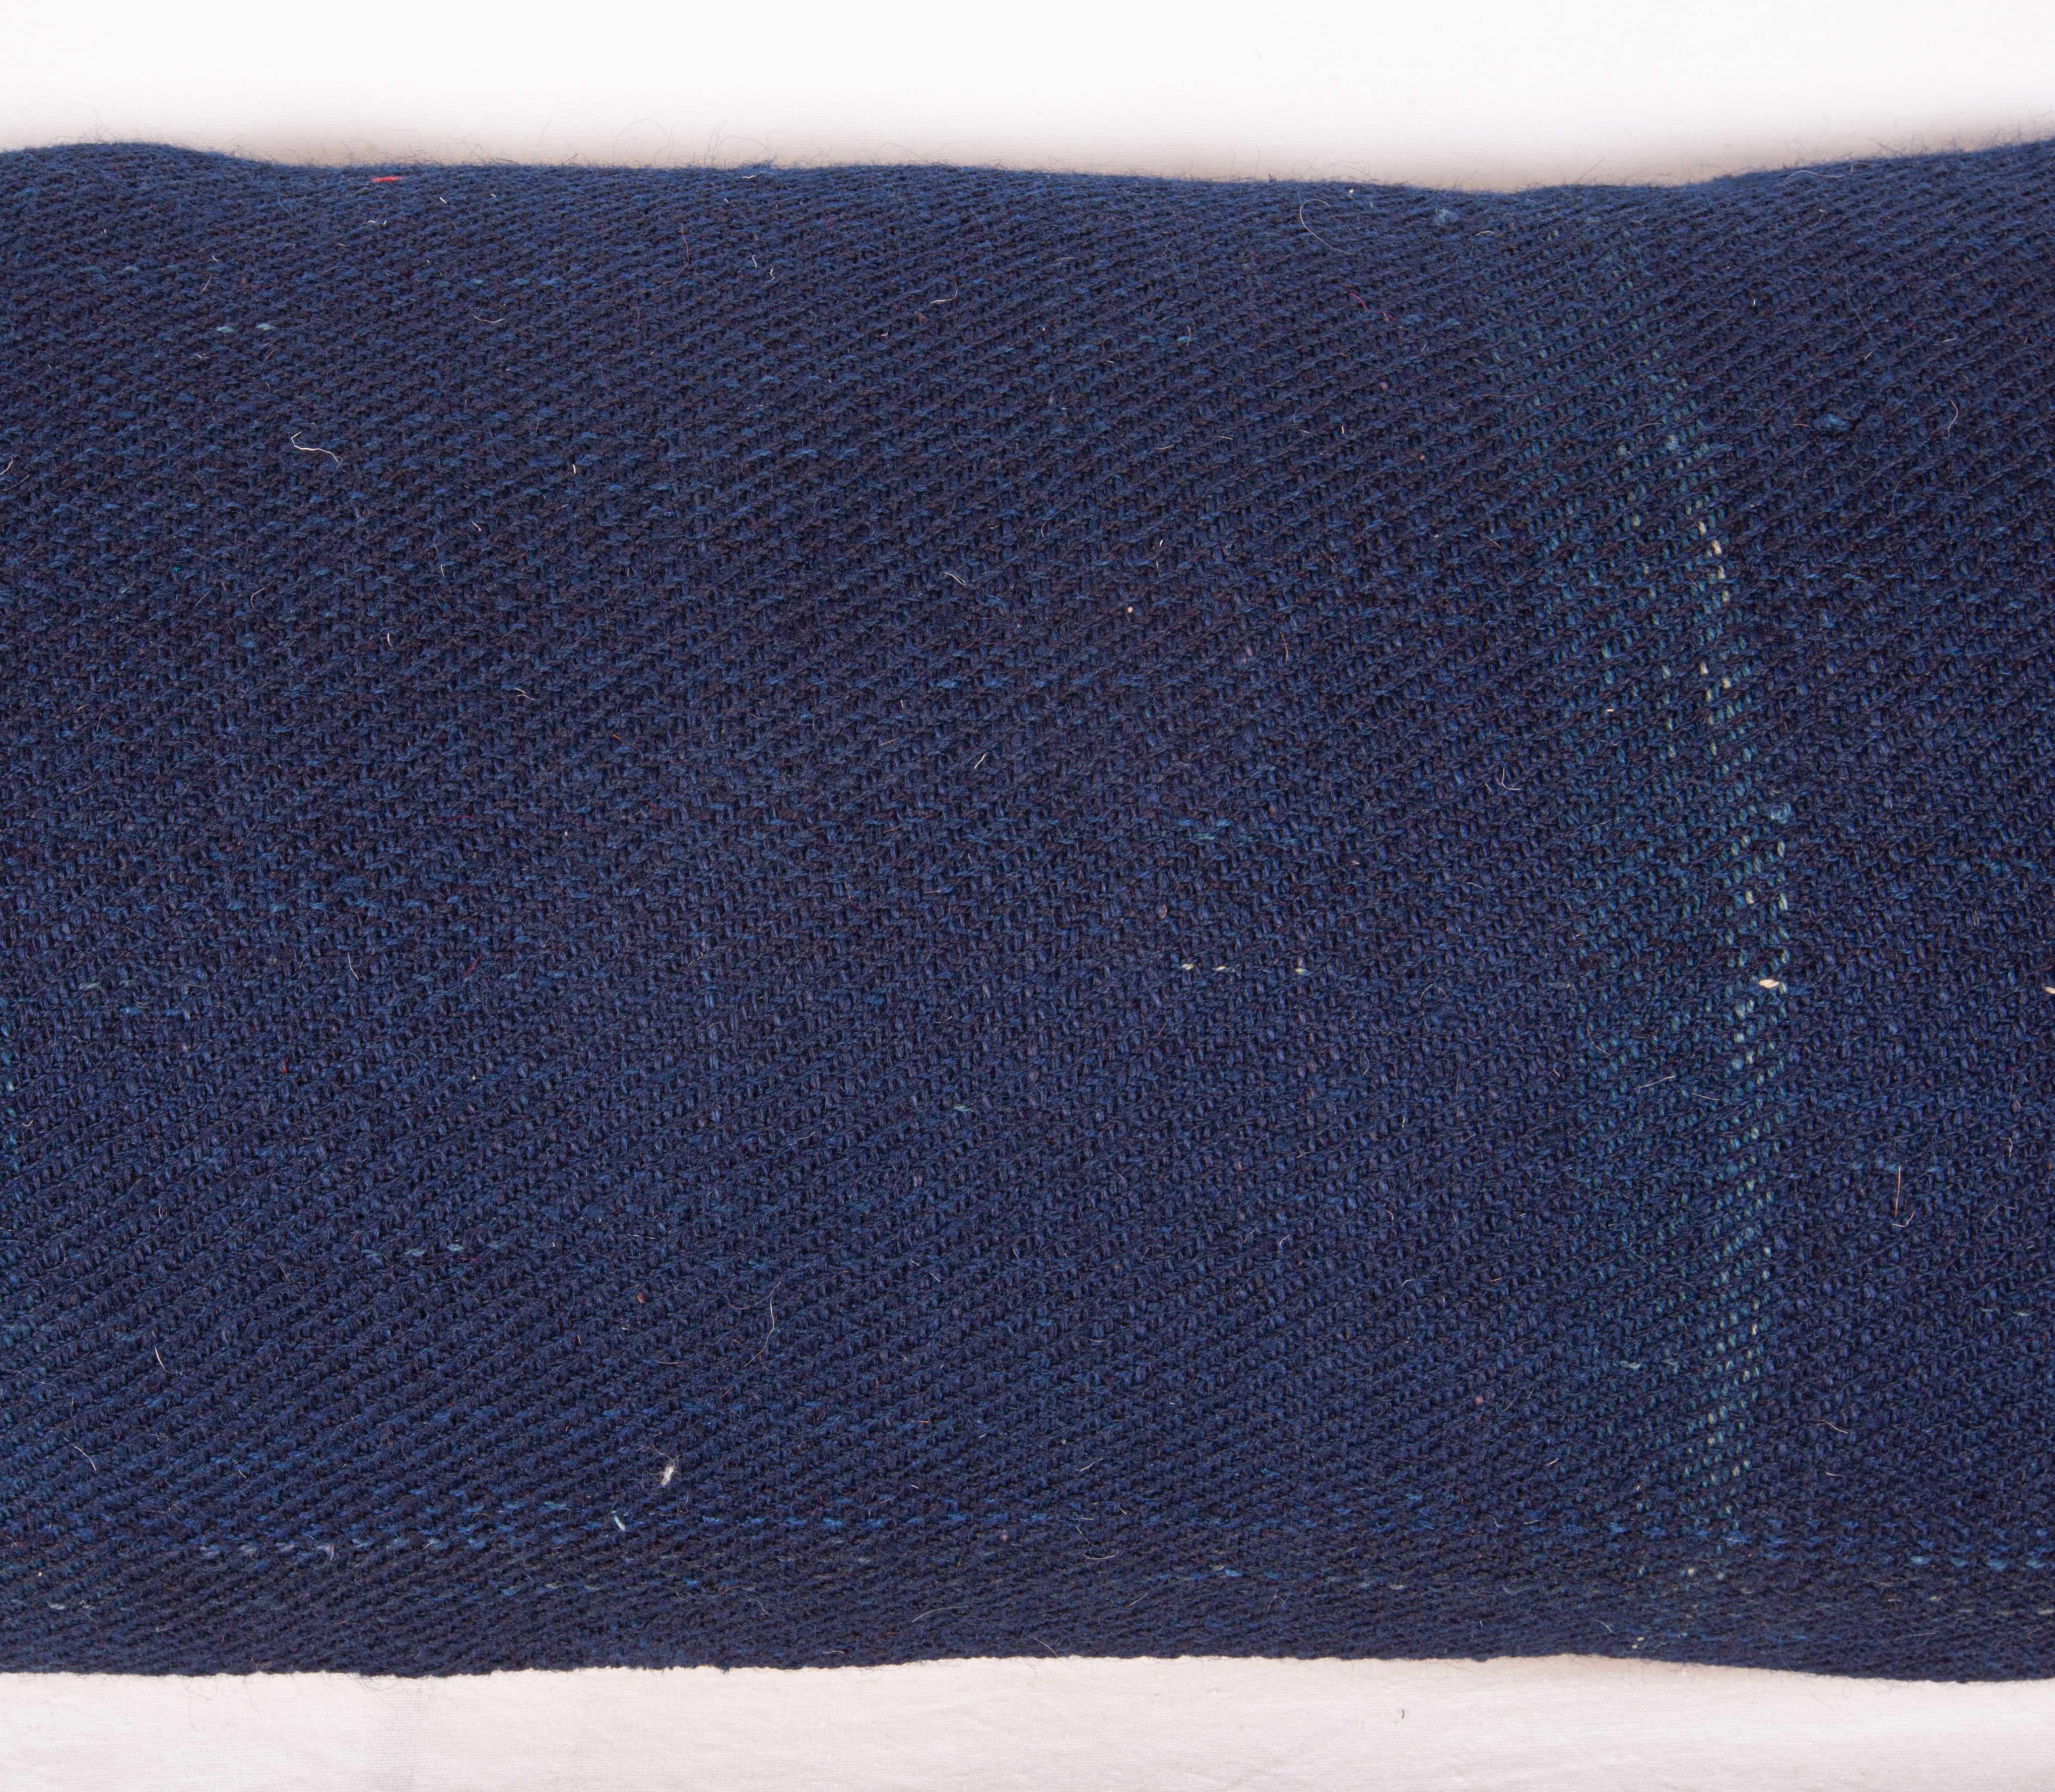 Hand-Woven Lumbar Kilim Pillow Case Made from a Mid-20th Century, Anatolian Cover For Sale